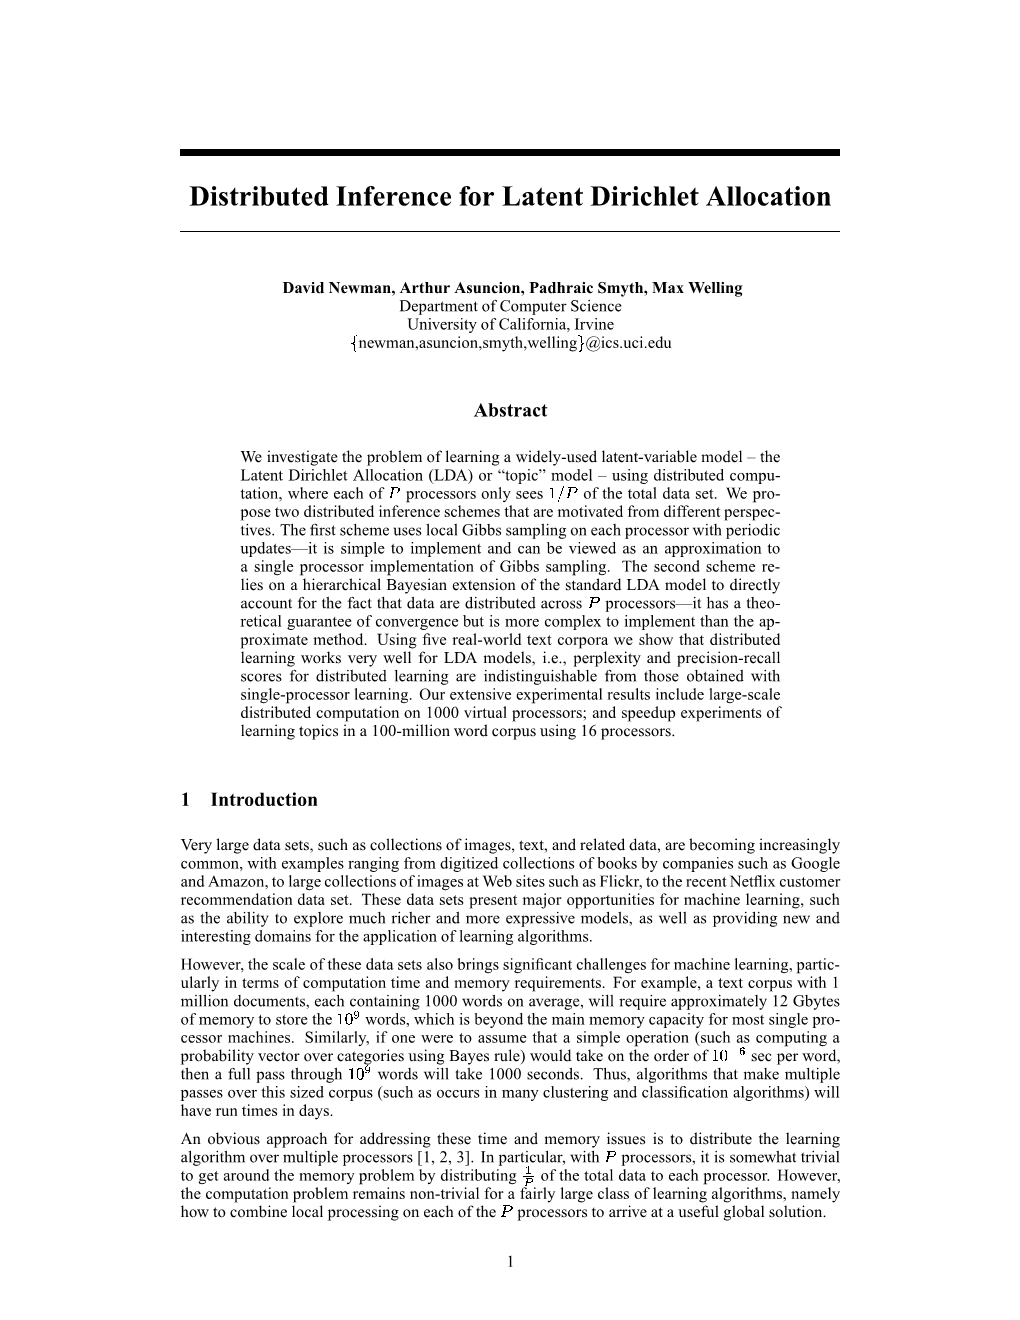 Distributed Inference for Latent Dirichlet Allocation